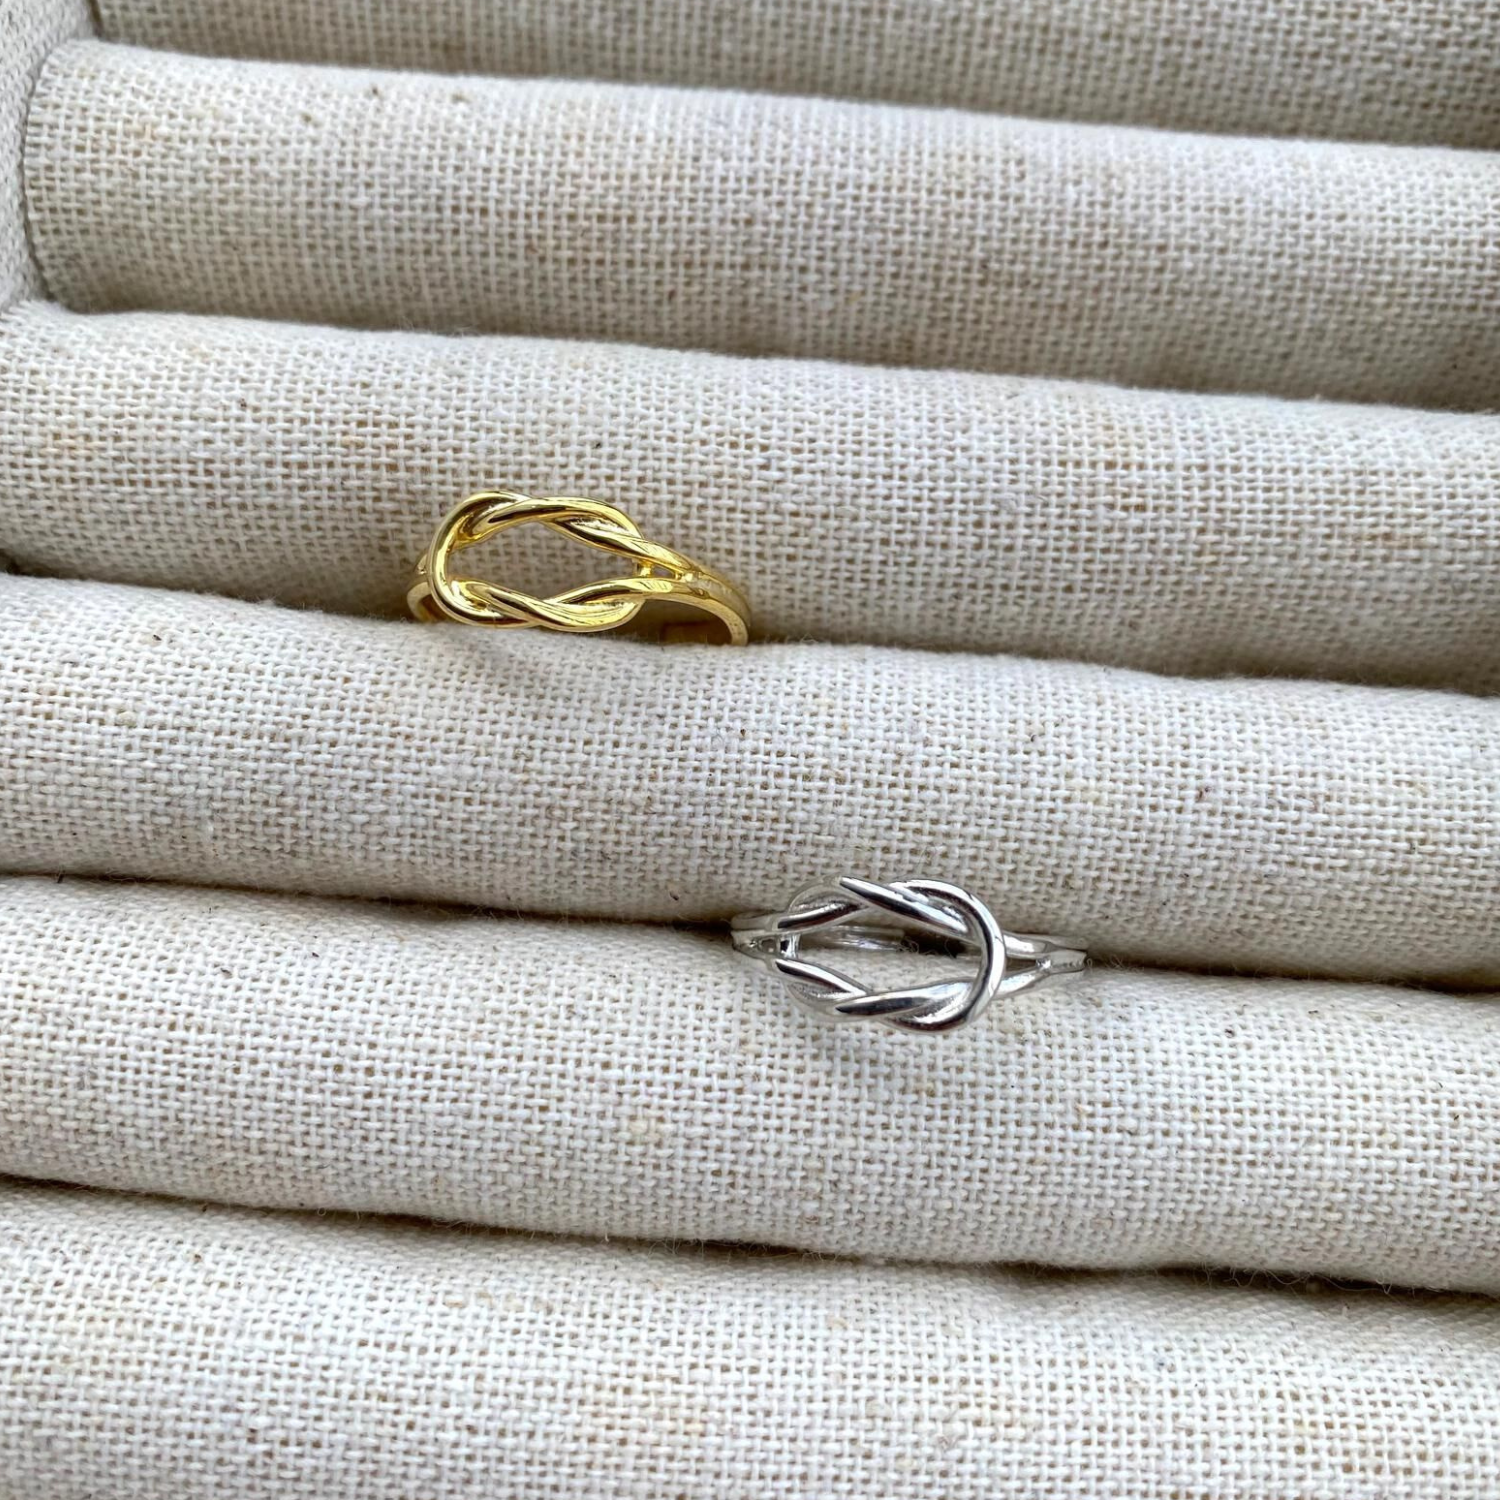 Knot Bracelet and Ring Set in Sterling Silver